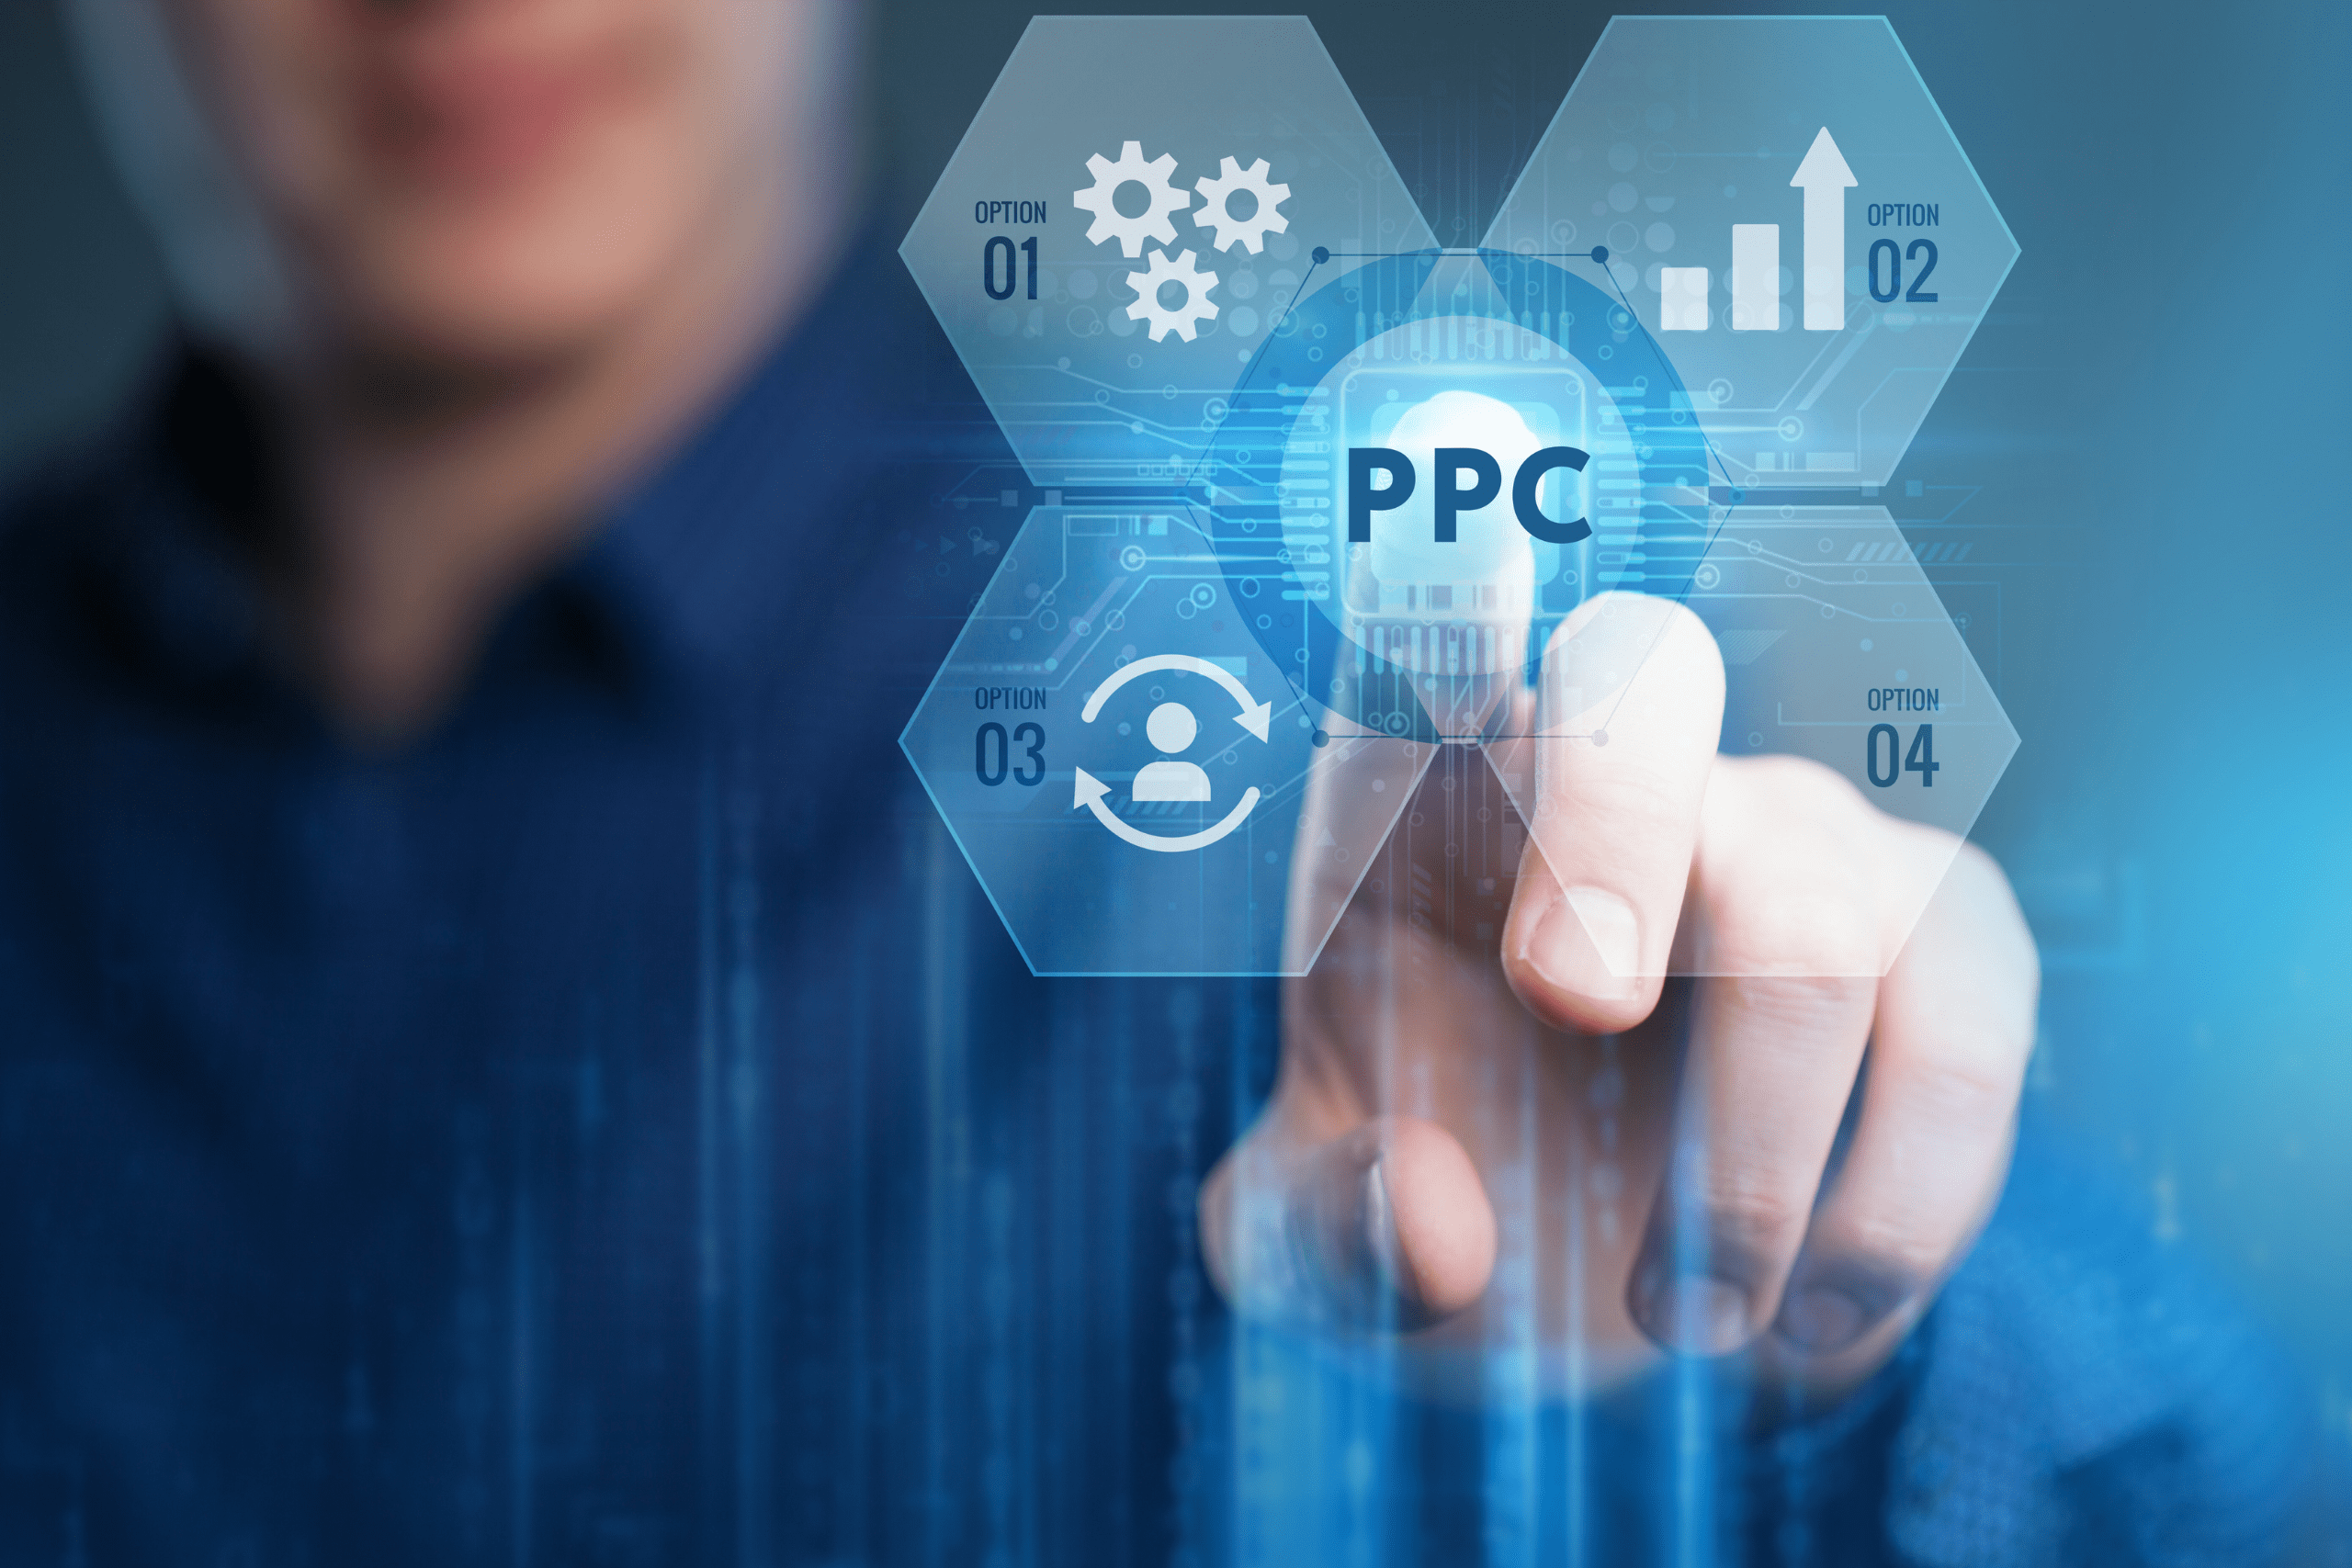 Essex PPC Agency: Choosing the right path with your search engine marketing